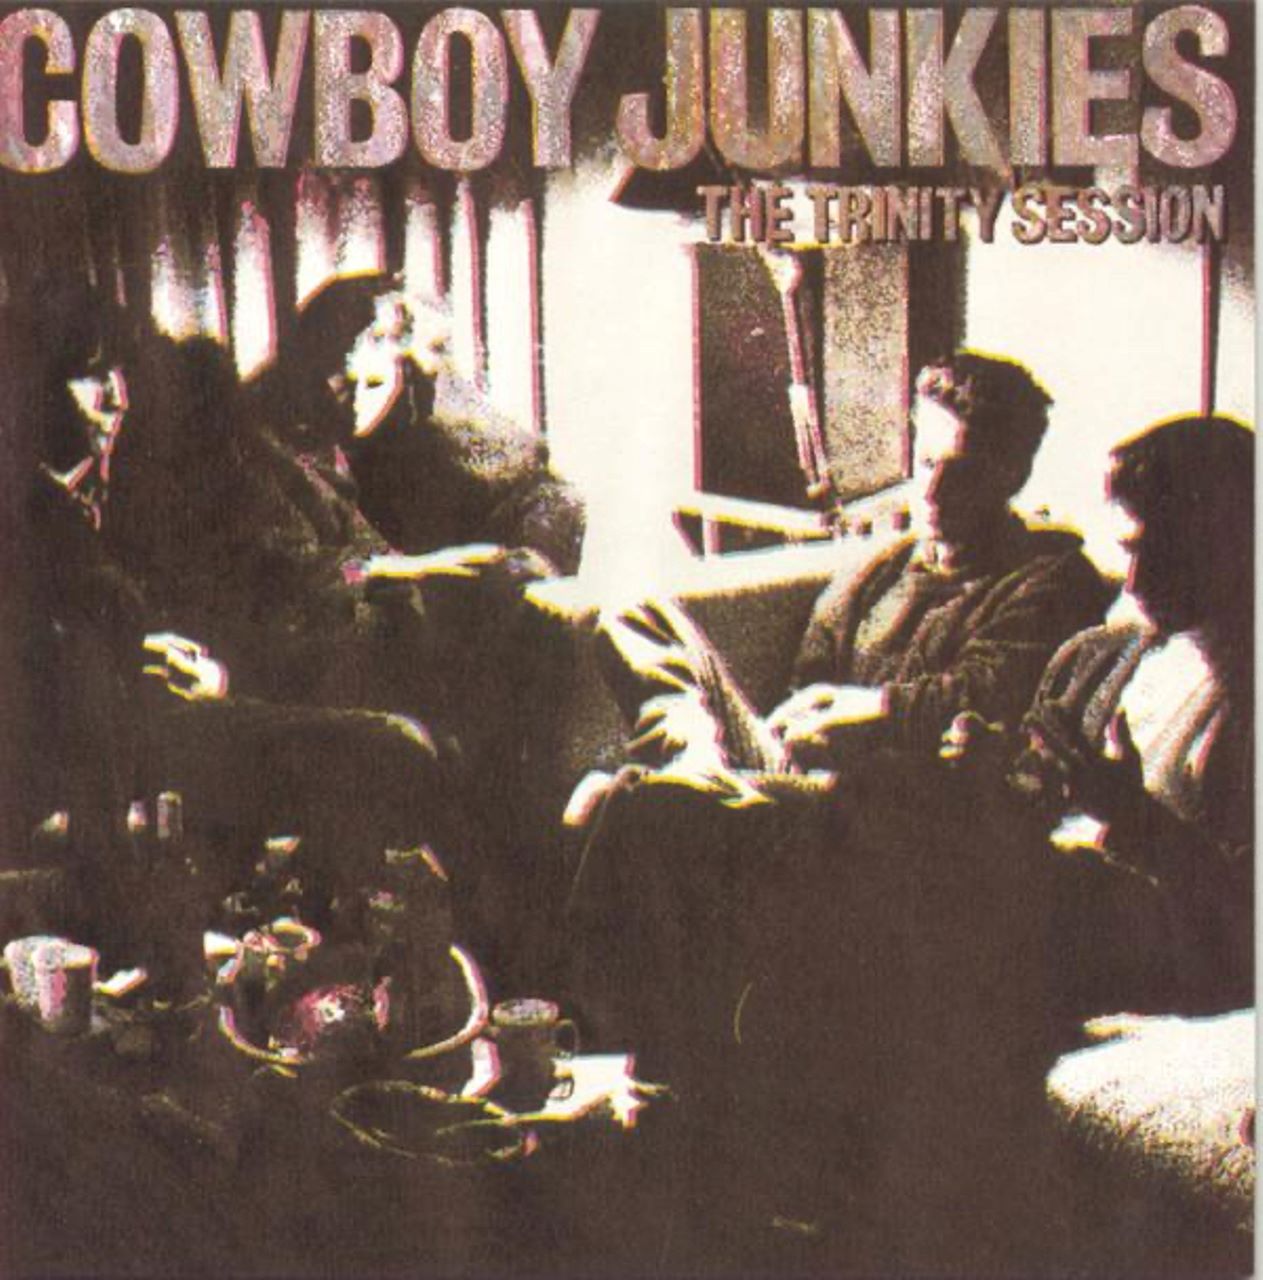 Cowboy Junkies - The Trinity Session cover album